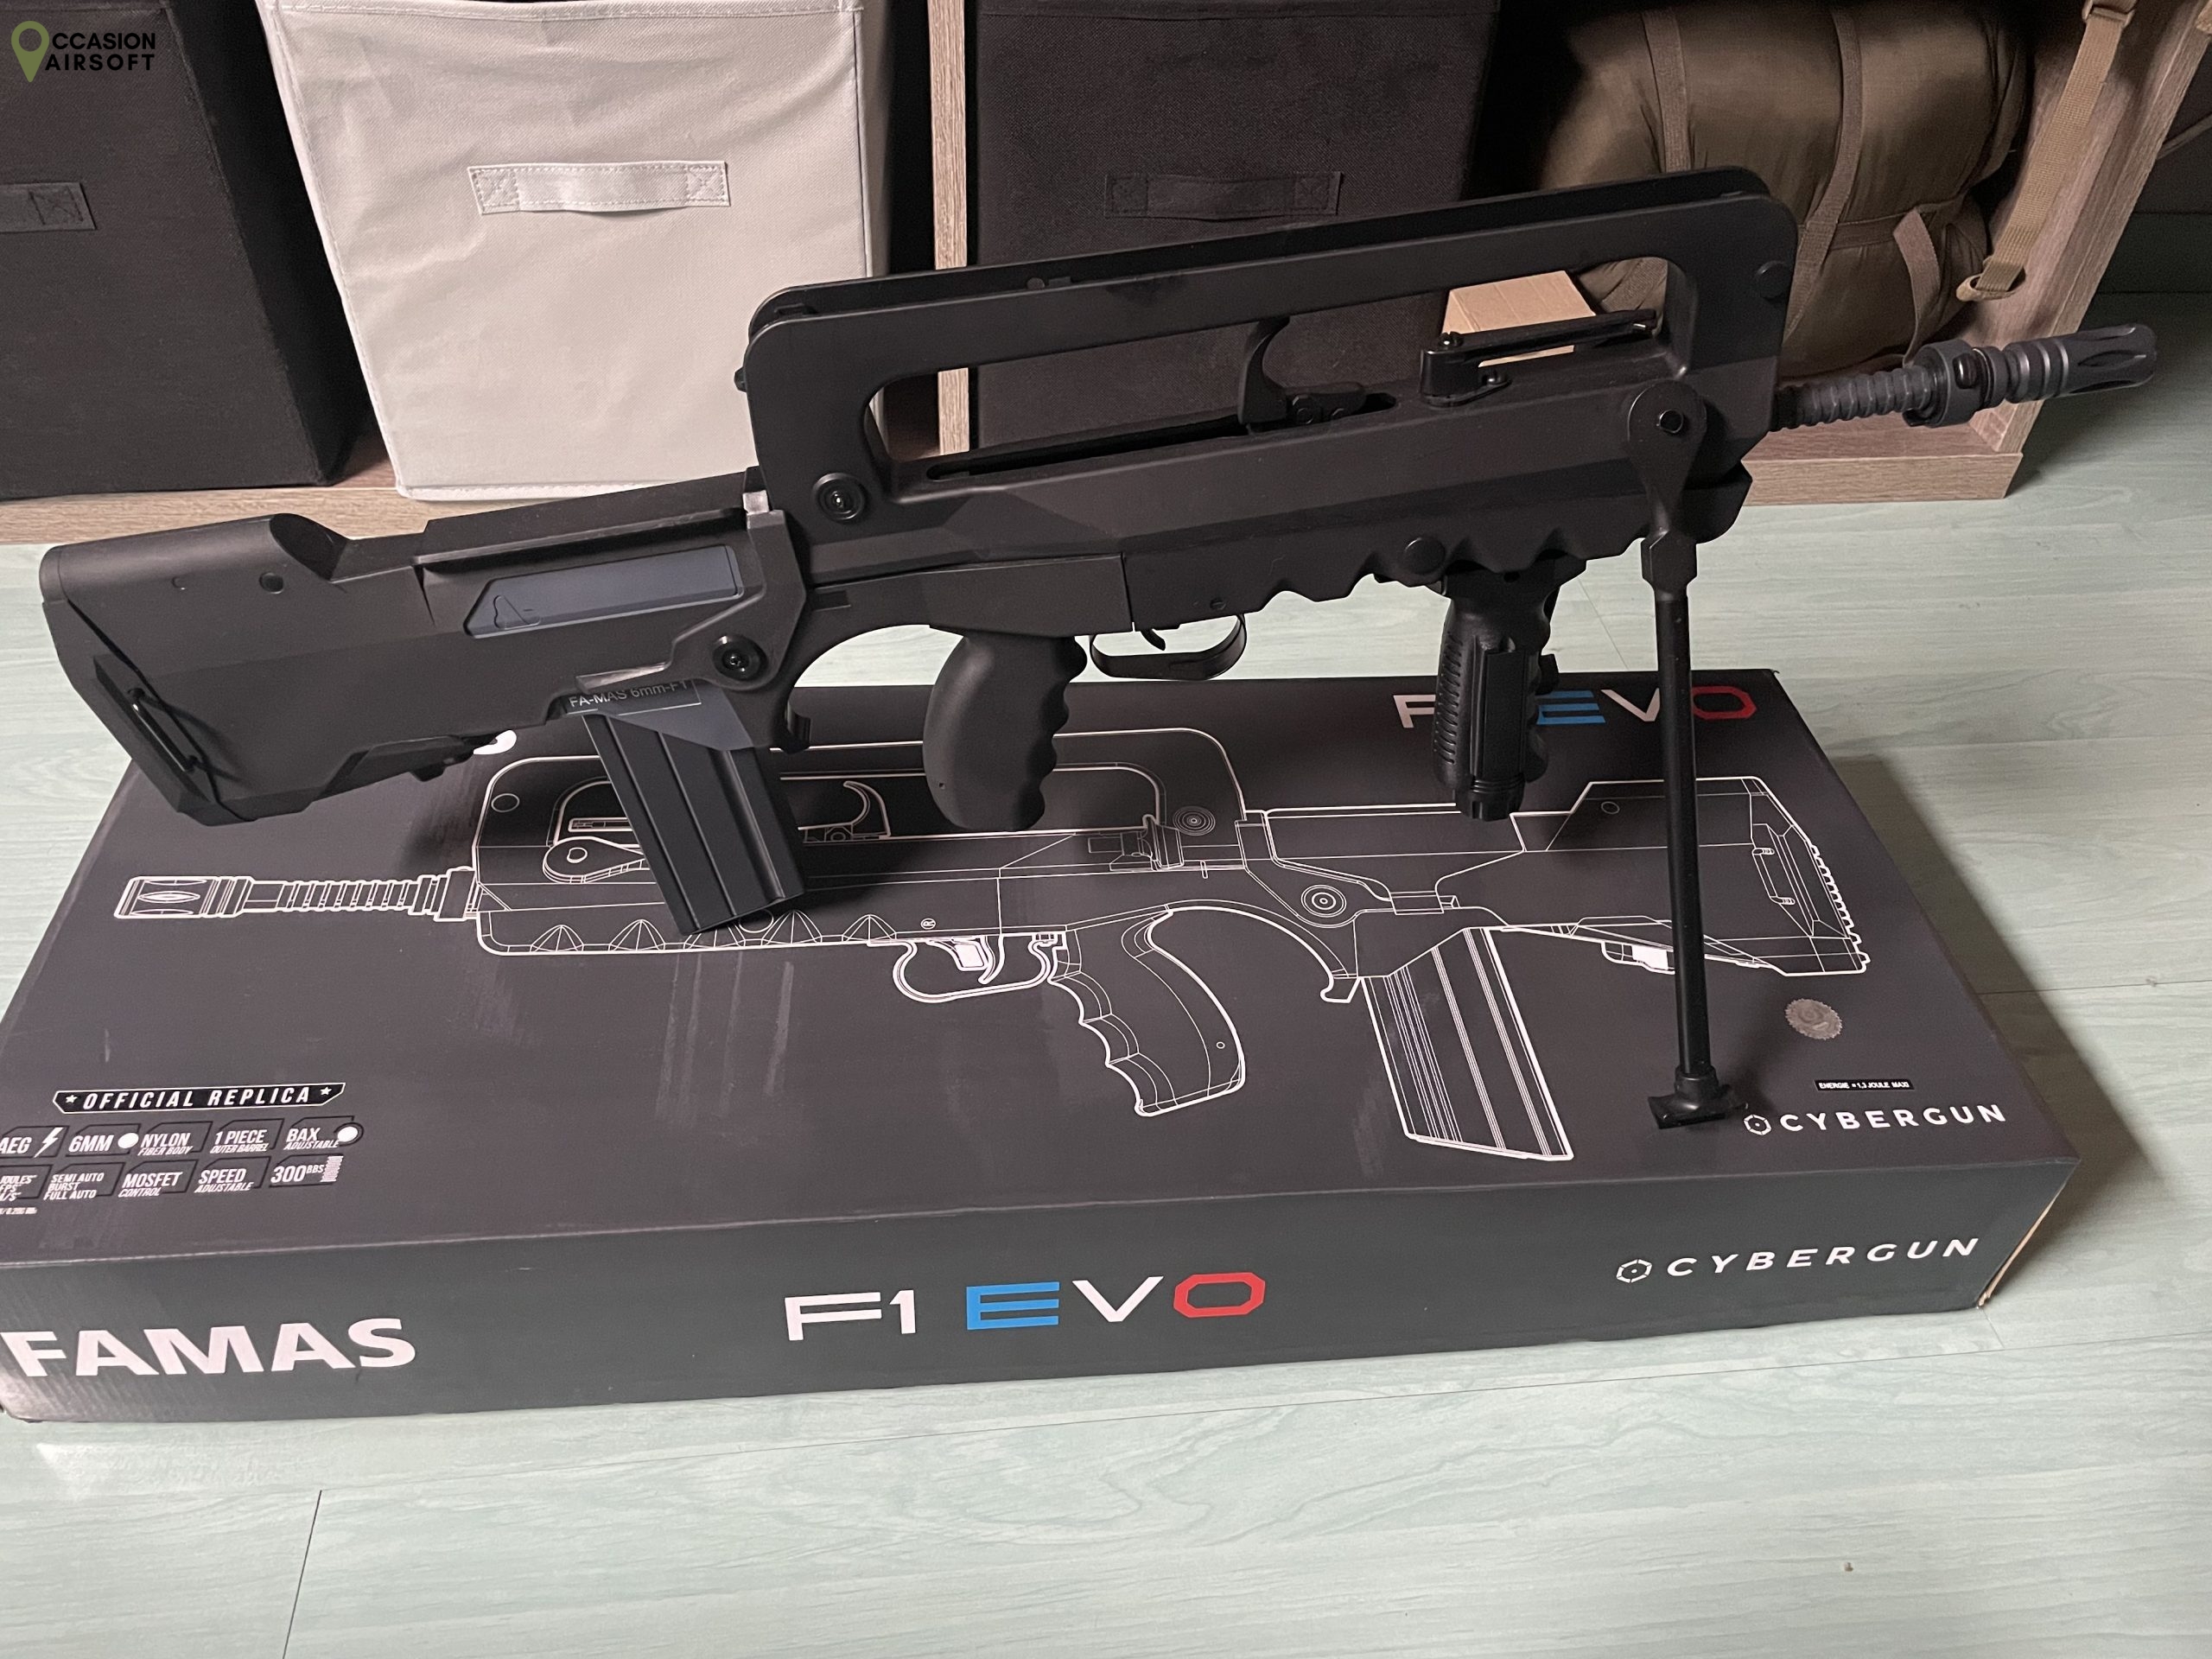 famas f1 neuf - Occasion airsoft N°1 de l'airsoft d'occasion